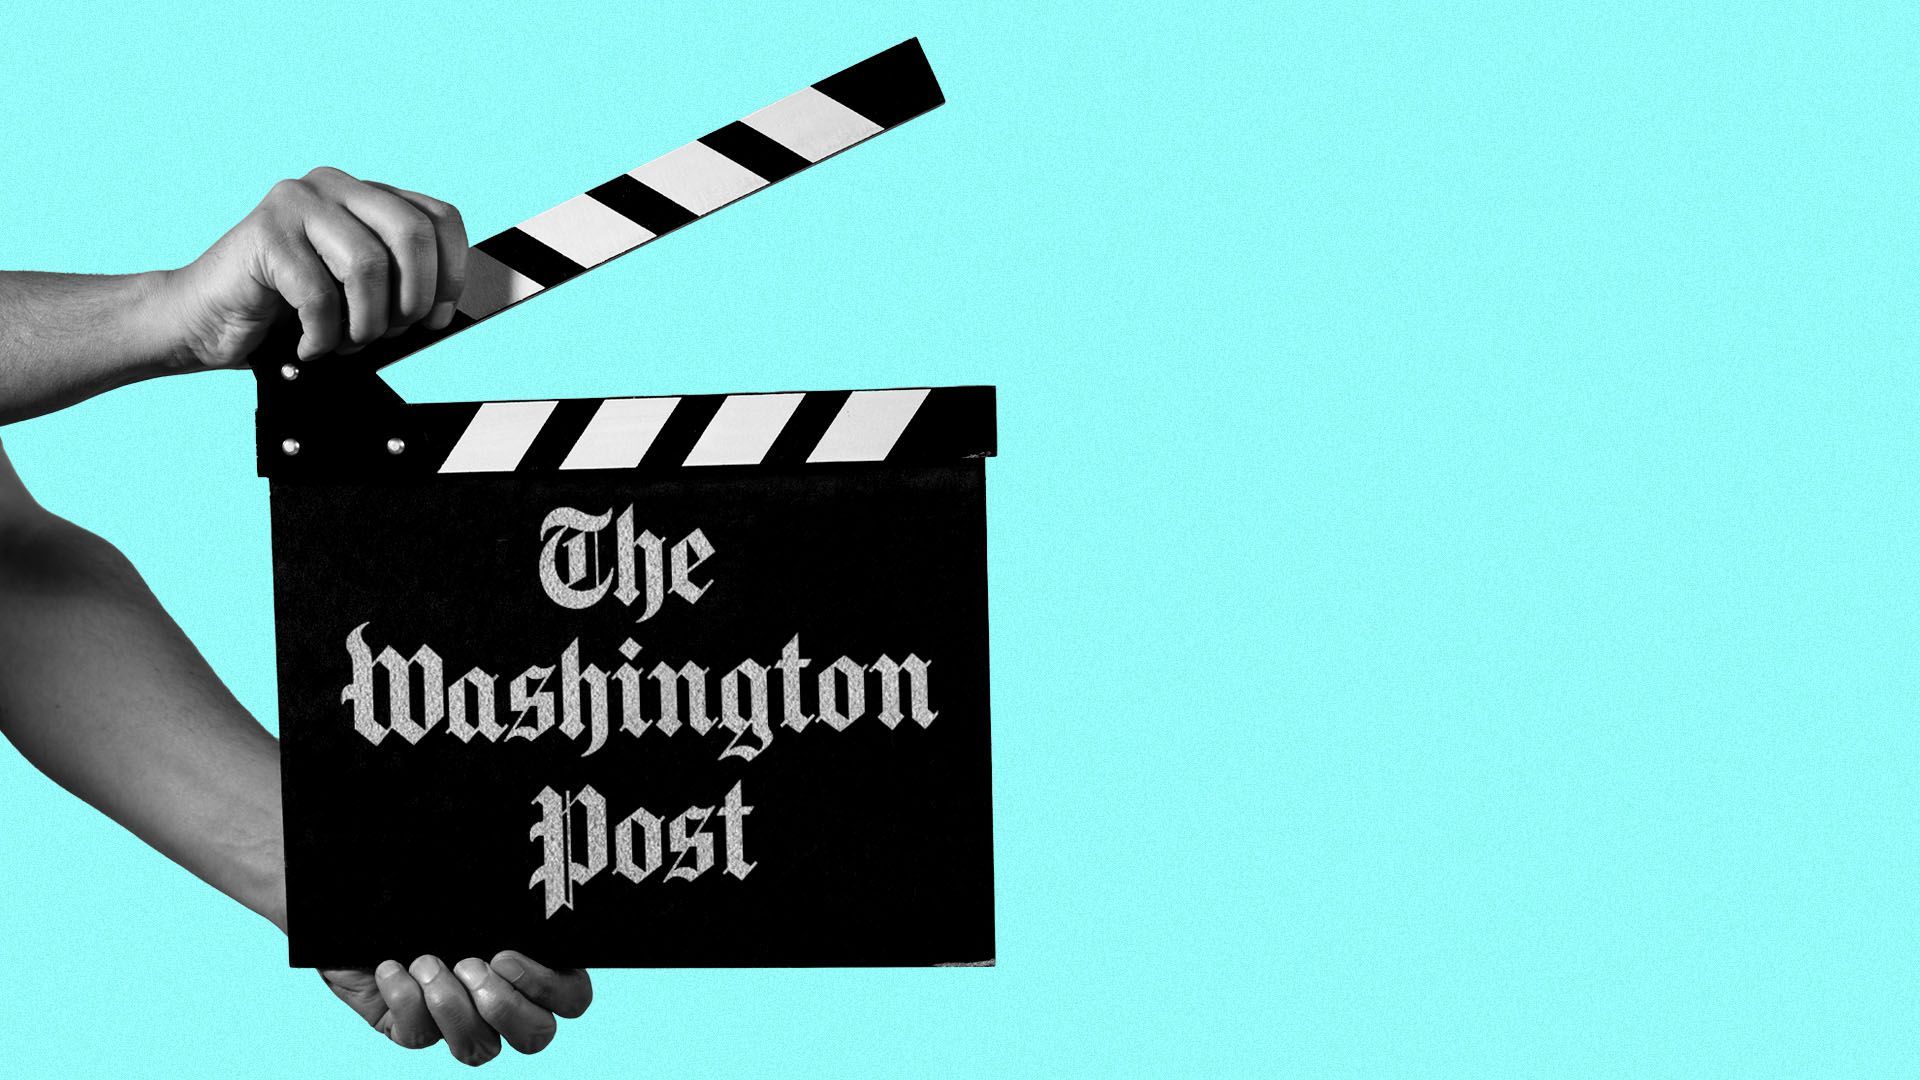 Illustration of a clap board with The Washington Post written on it